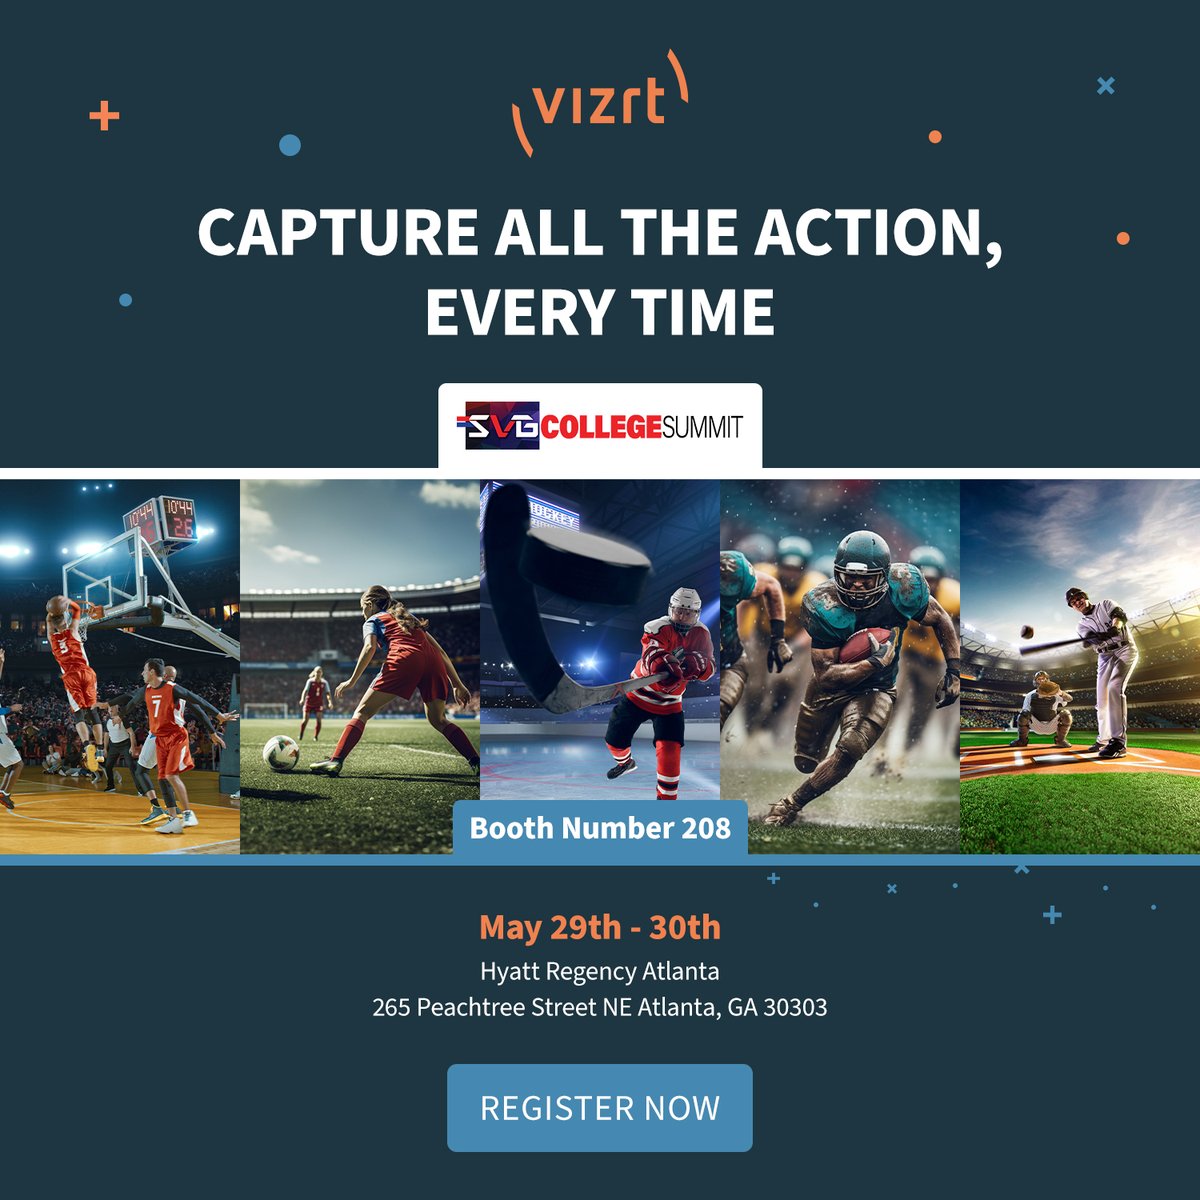 Join us at @SVGCollege Summit on May 29-30th!

Learn how our solutions can: 

⚡ Electrify the viewing experience 
🌎 Produce from anywhere, anytime  
📈 Impress your sponsors 
📣 Engage and entertain fans

Book a meeting: ow.ly/jefo50RzeW4

#SVGCollegeSummit